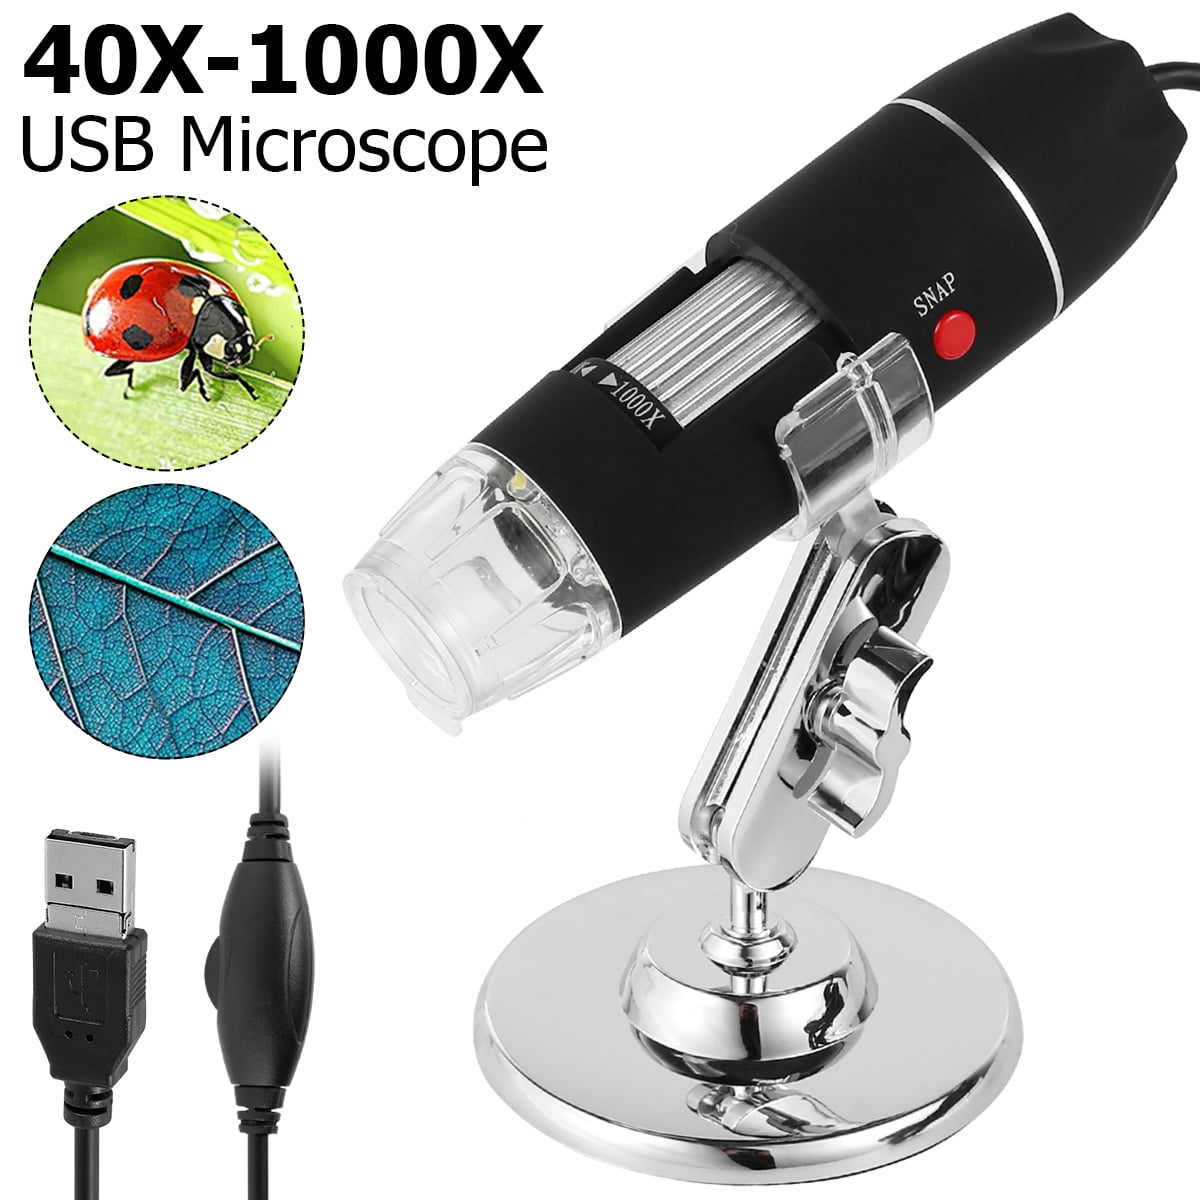 Hands Diy 40 1000x Magnification Endoscope Wifi Usb Hd Digital Microscope With 8 Led Light Handheld Portable Camera Stand For Iphone Ipad Smartphone Tablet Pc Com